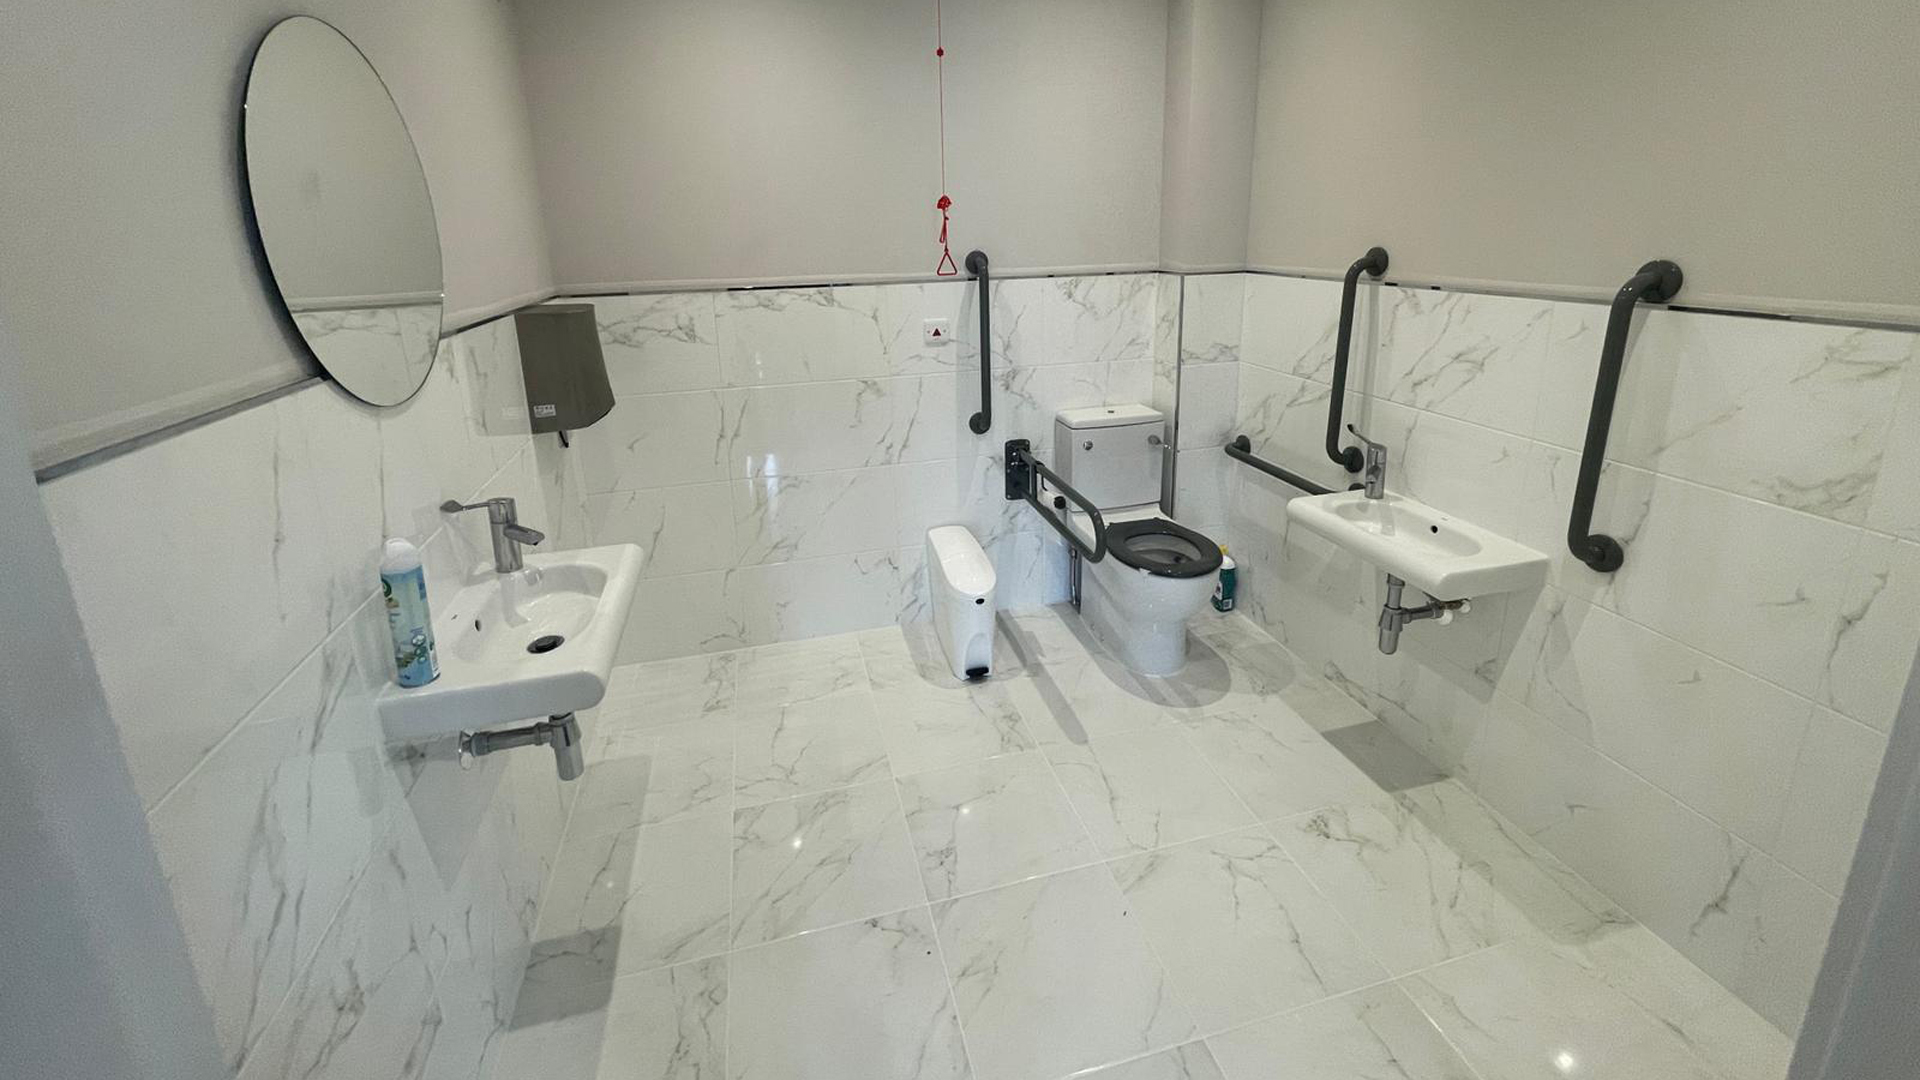 WC with toilet and two sinks, plus mirror and grab rails. White marbled tiling